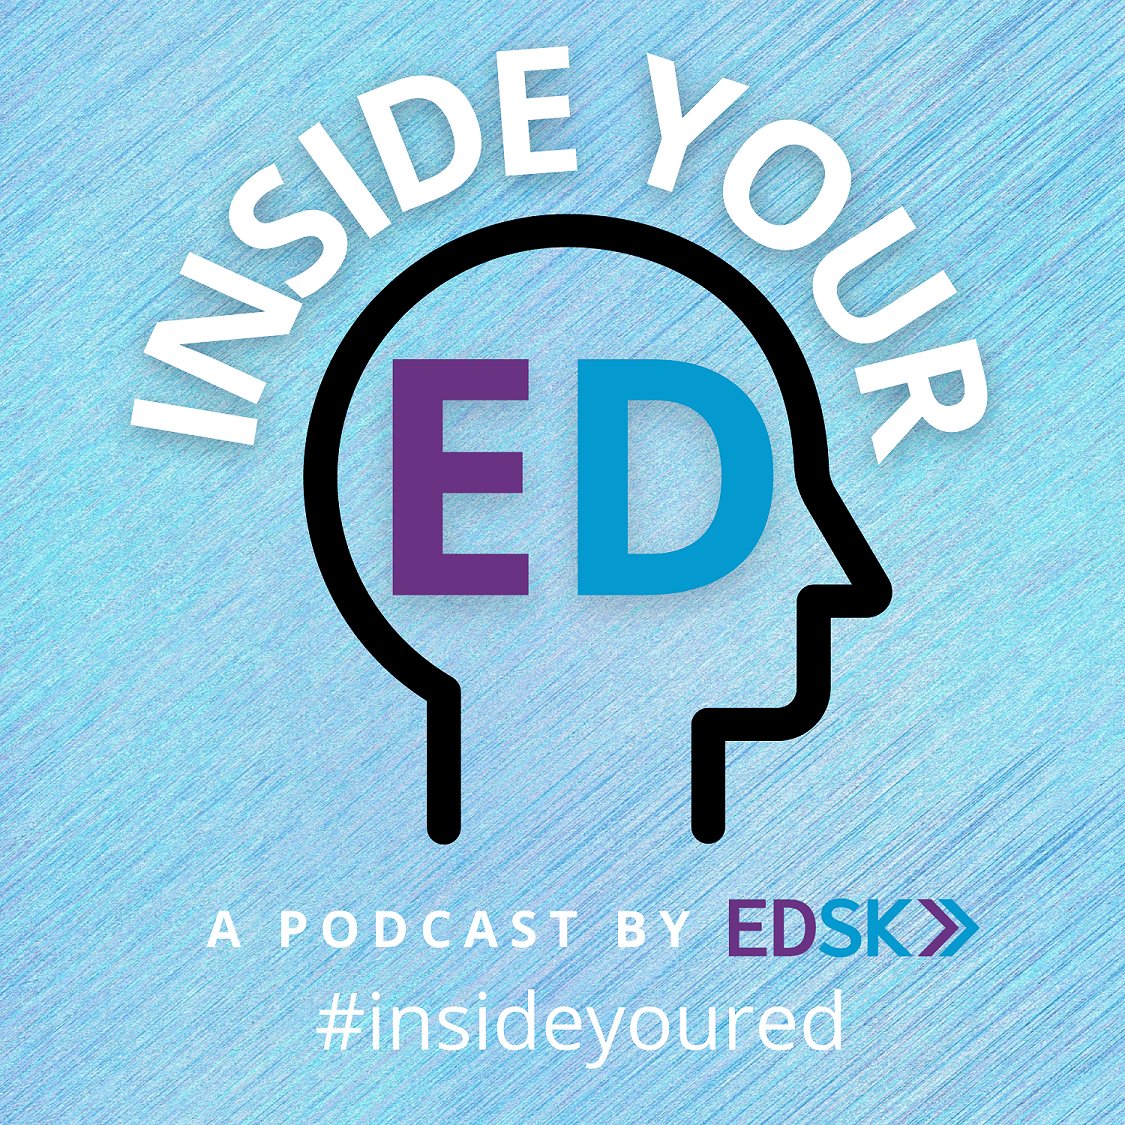 🚨NEW PODCAST EPISODE🚨 Why are so many pupils still absent from school? @SallyBurtonshaw and @MsEmilyHunt1 joined us on #insideyoured to discuss why absence rates in England remain stubbornly high, and what can be done about it. 🎧edsk.org/inside-your-ed…